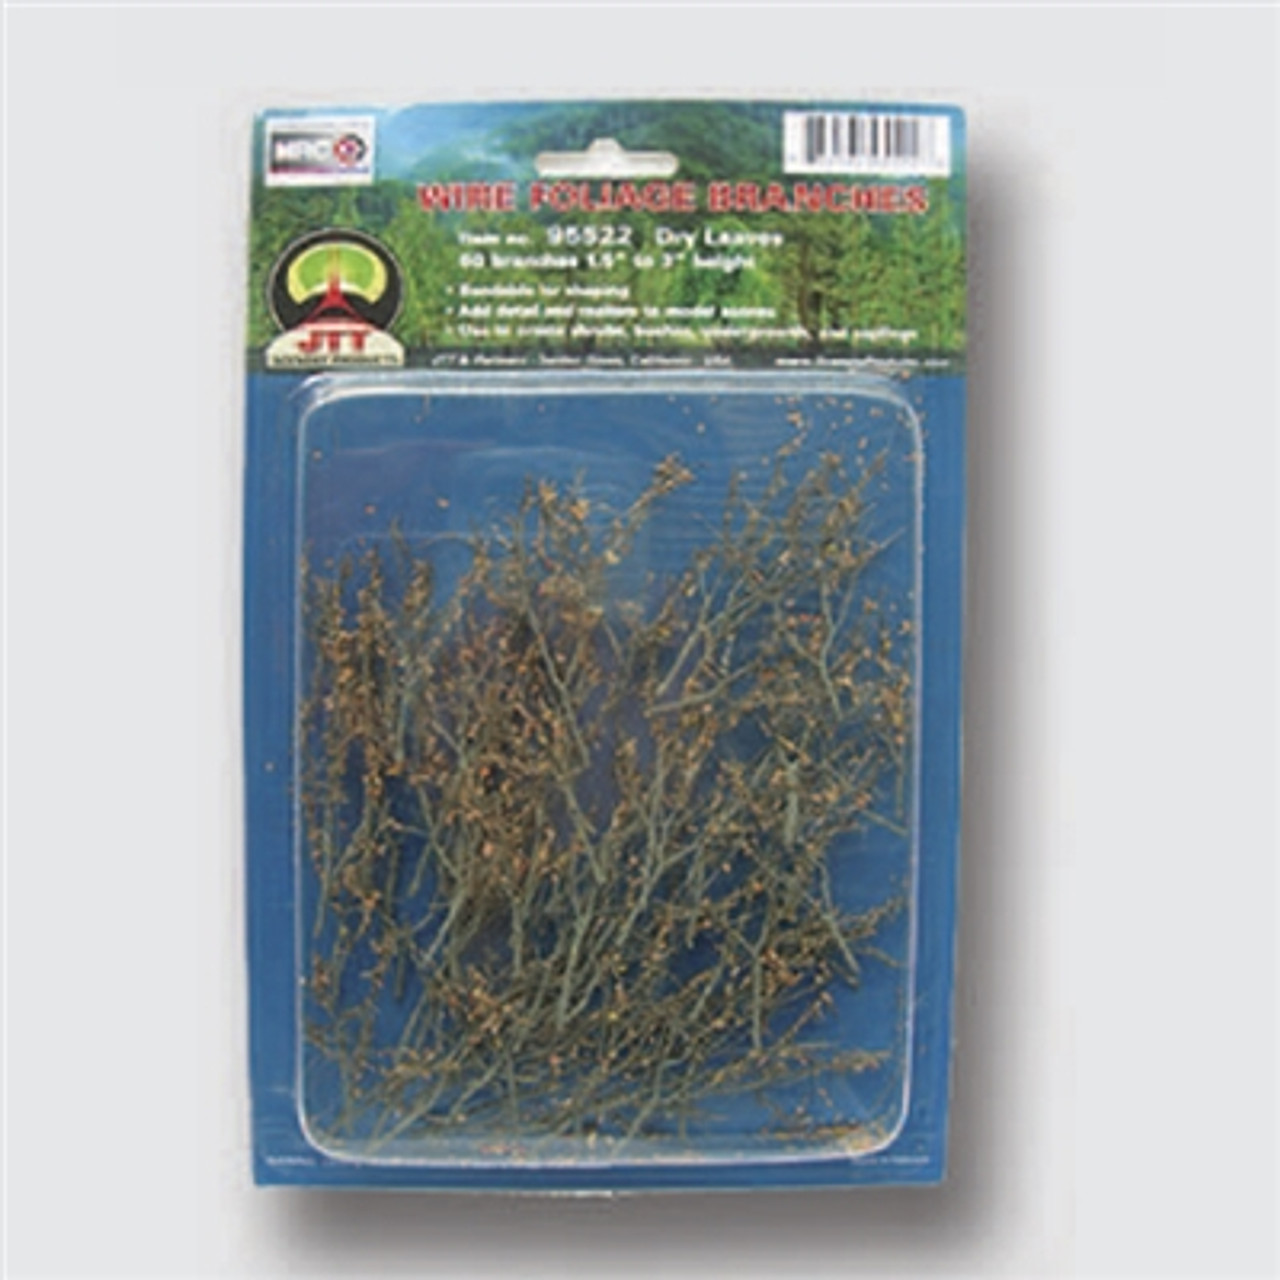 JTT Scenery 95522 Foliage Branches, Dry Leaves 1.5" to 3", 60 pcs.